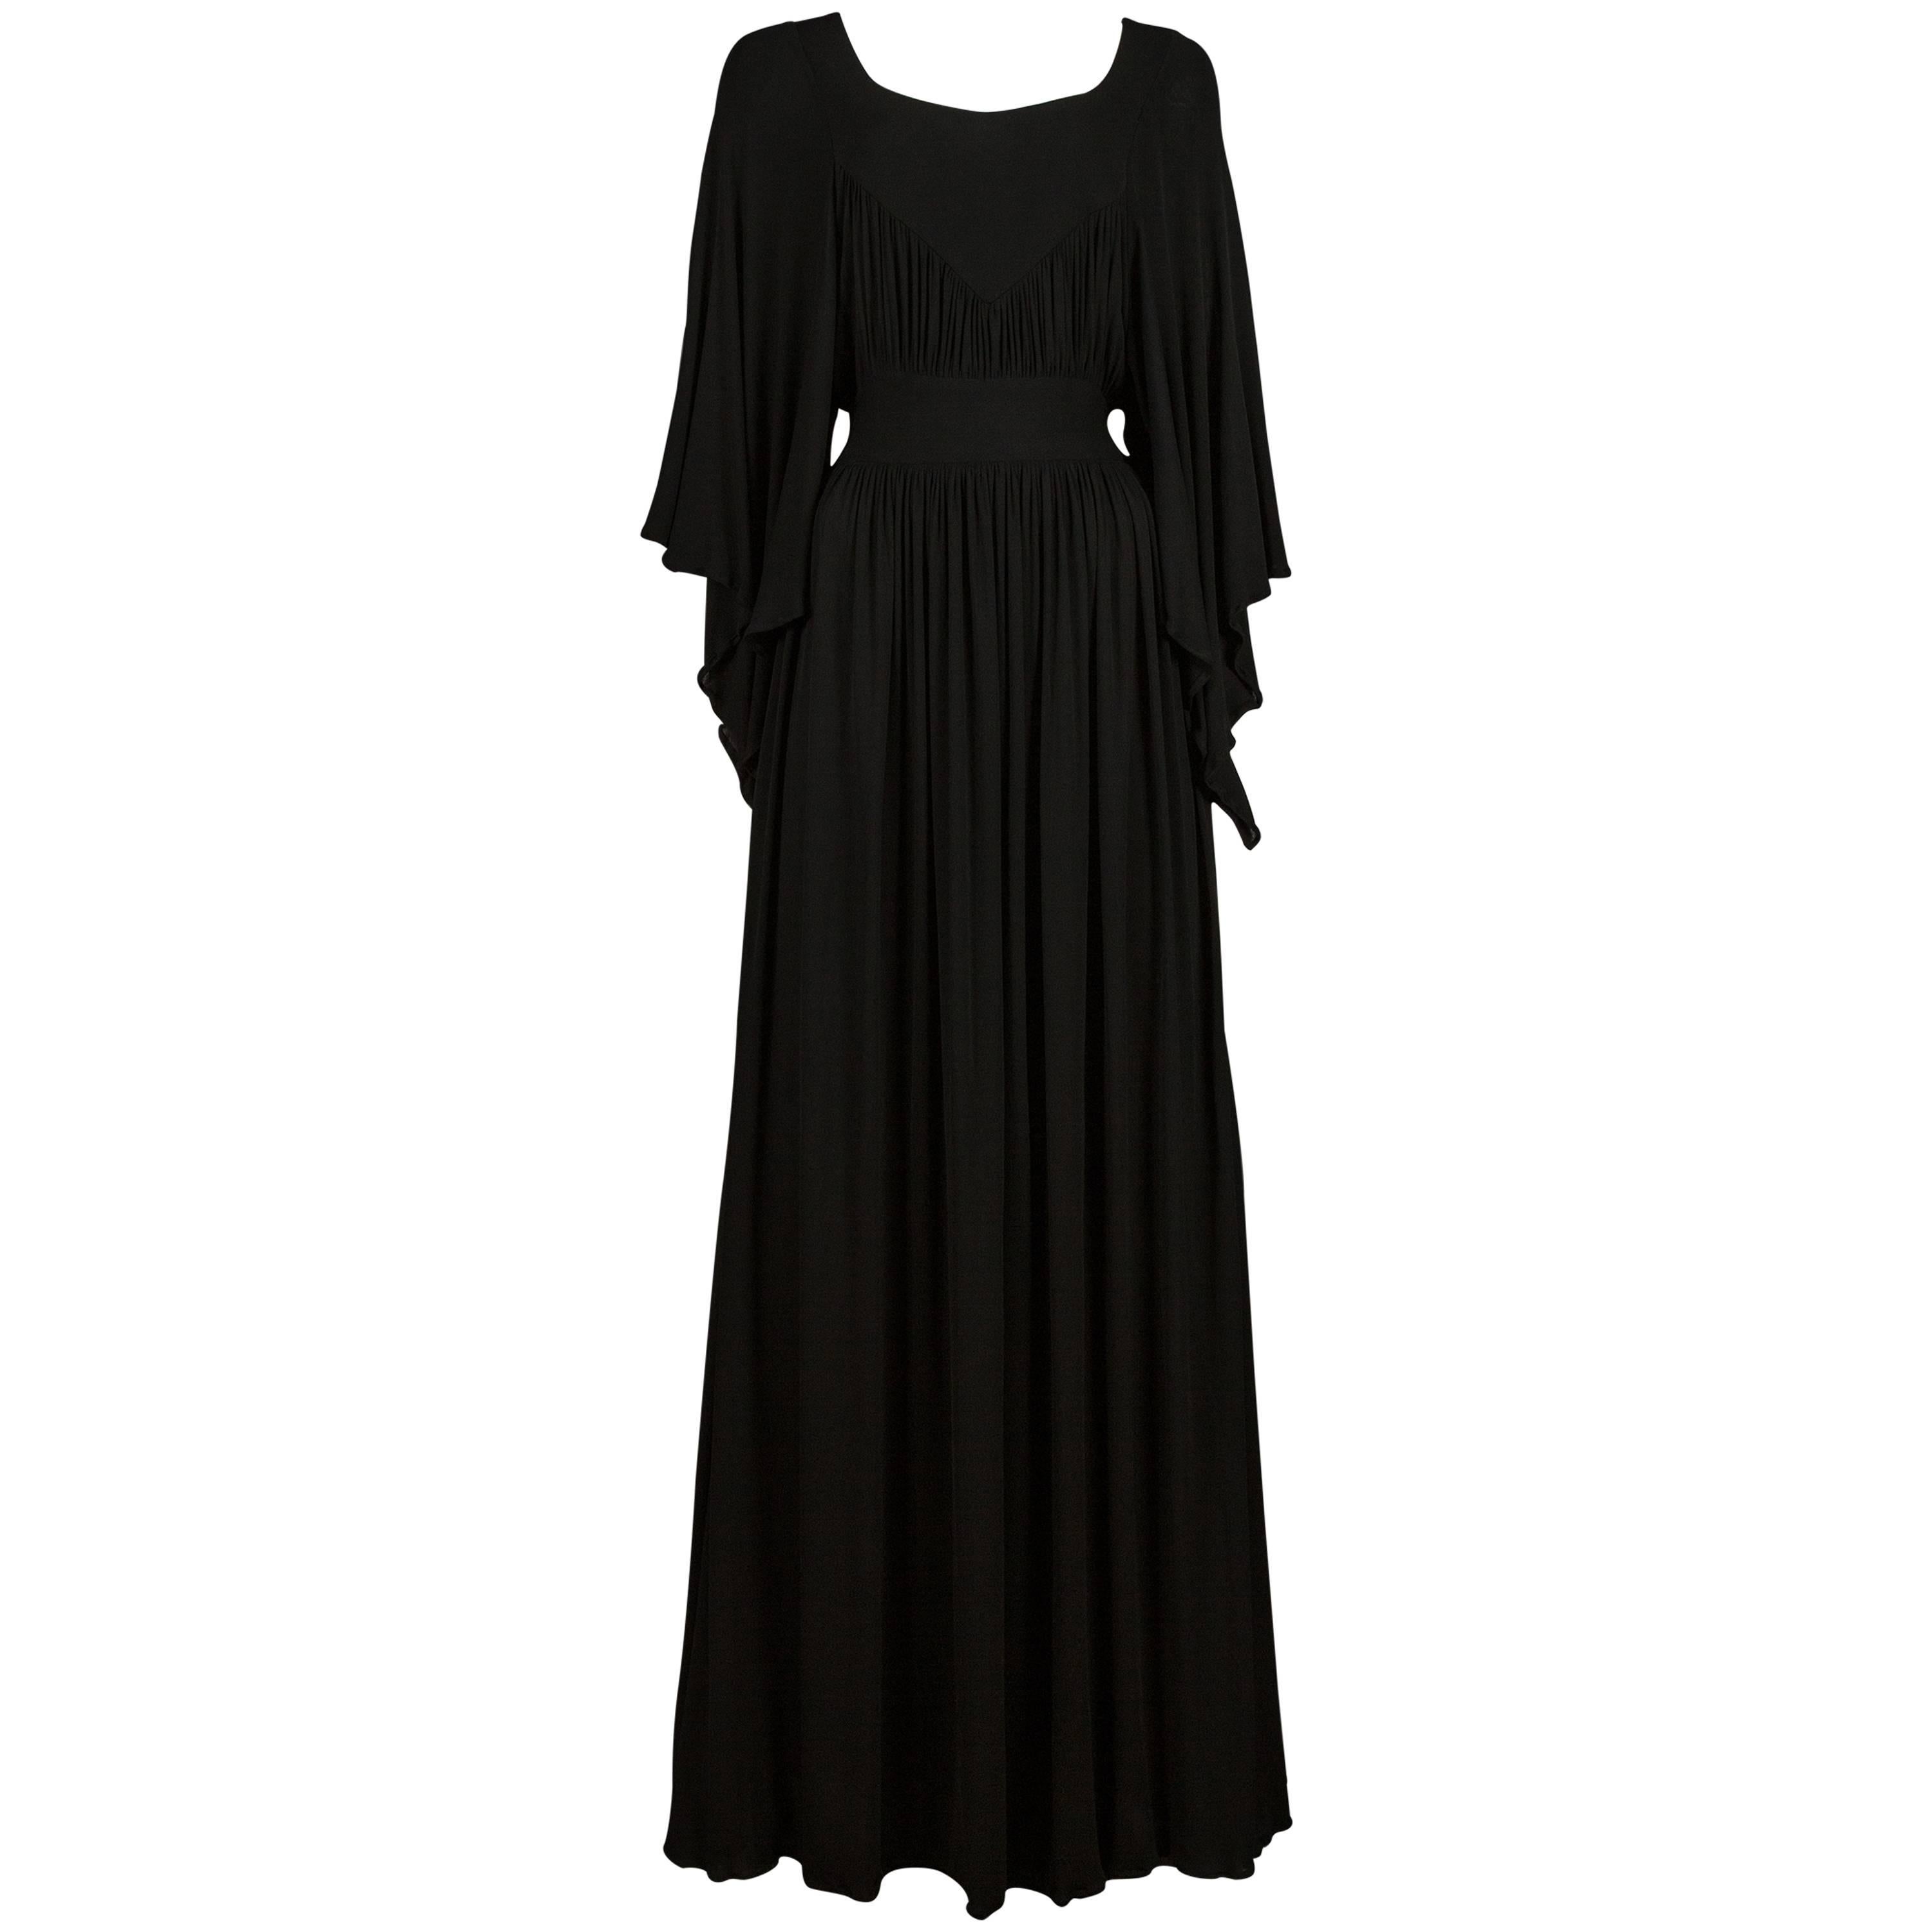 Quorum by Ossie Clark pleated black jersey evening gown, circa 1965-68